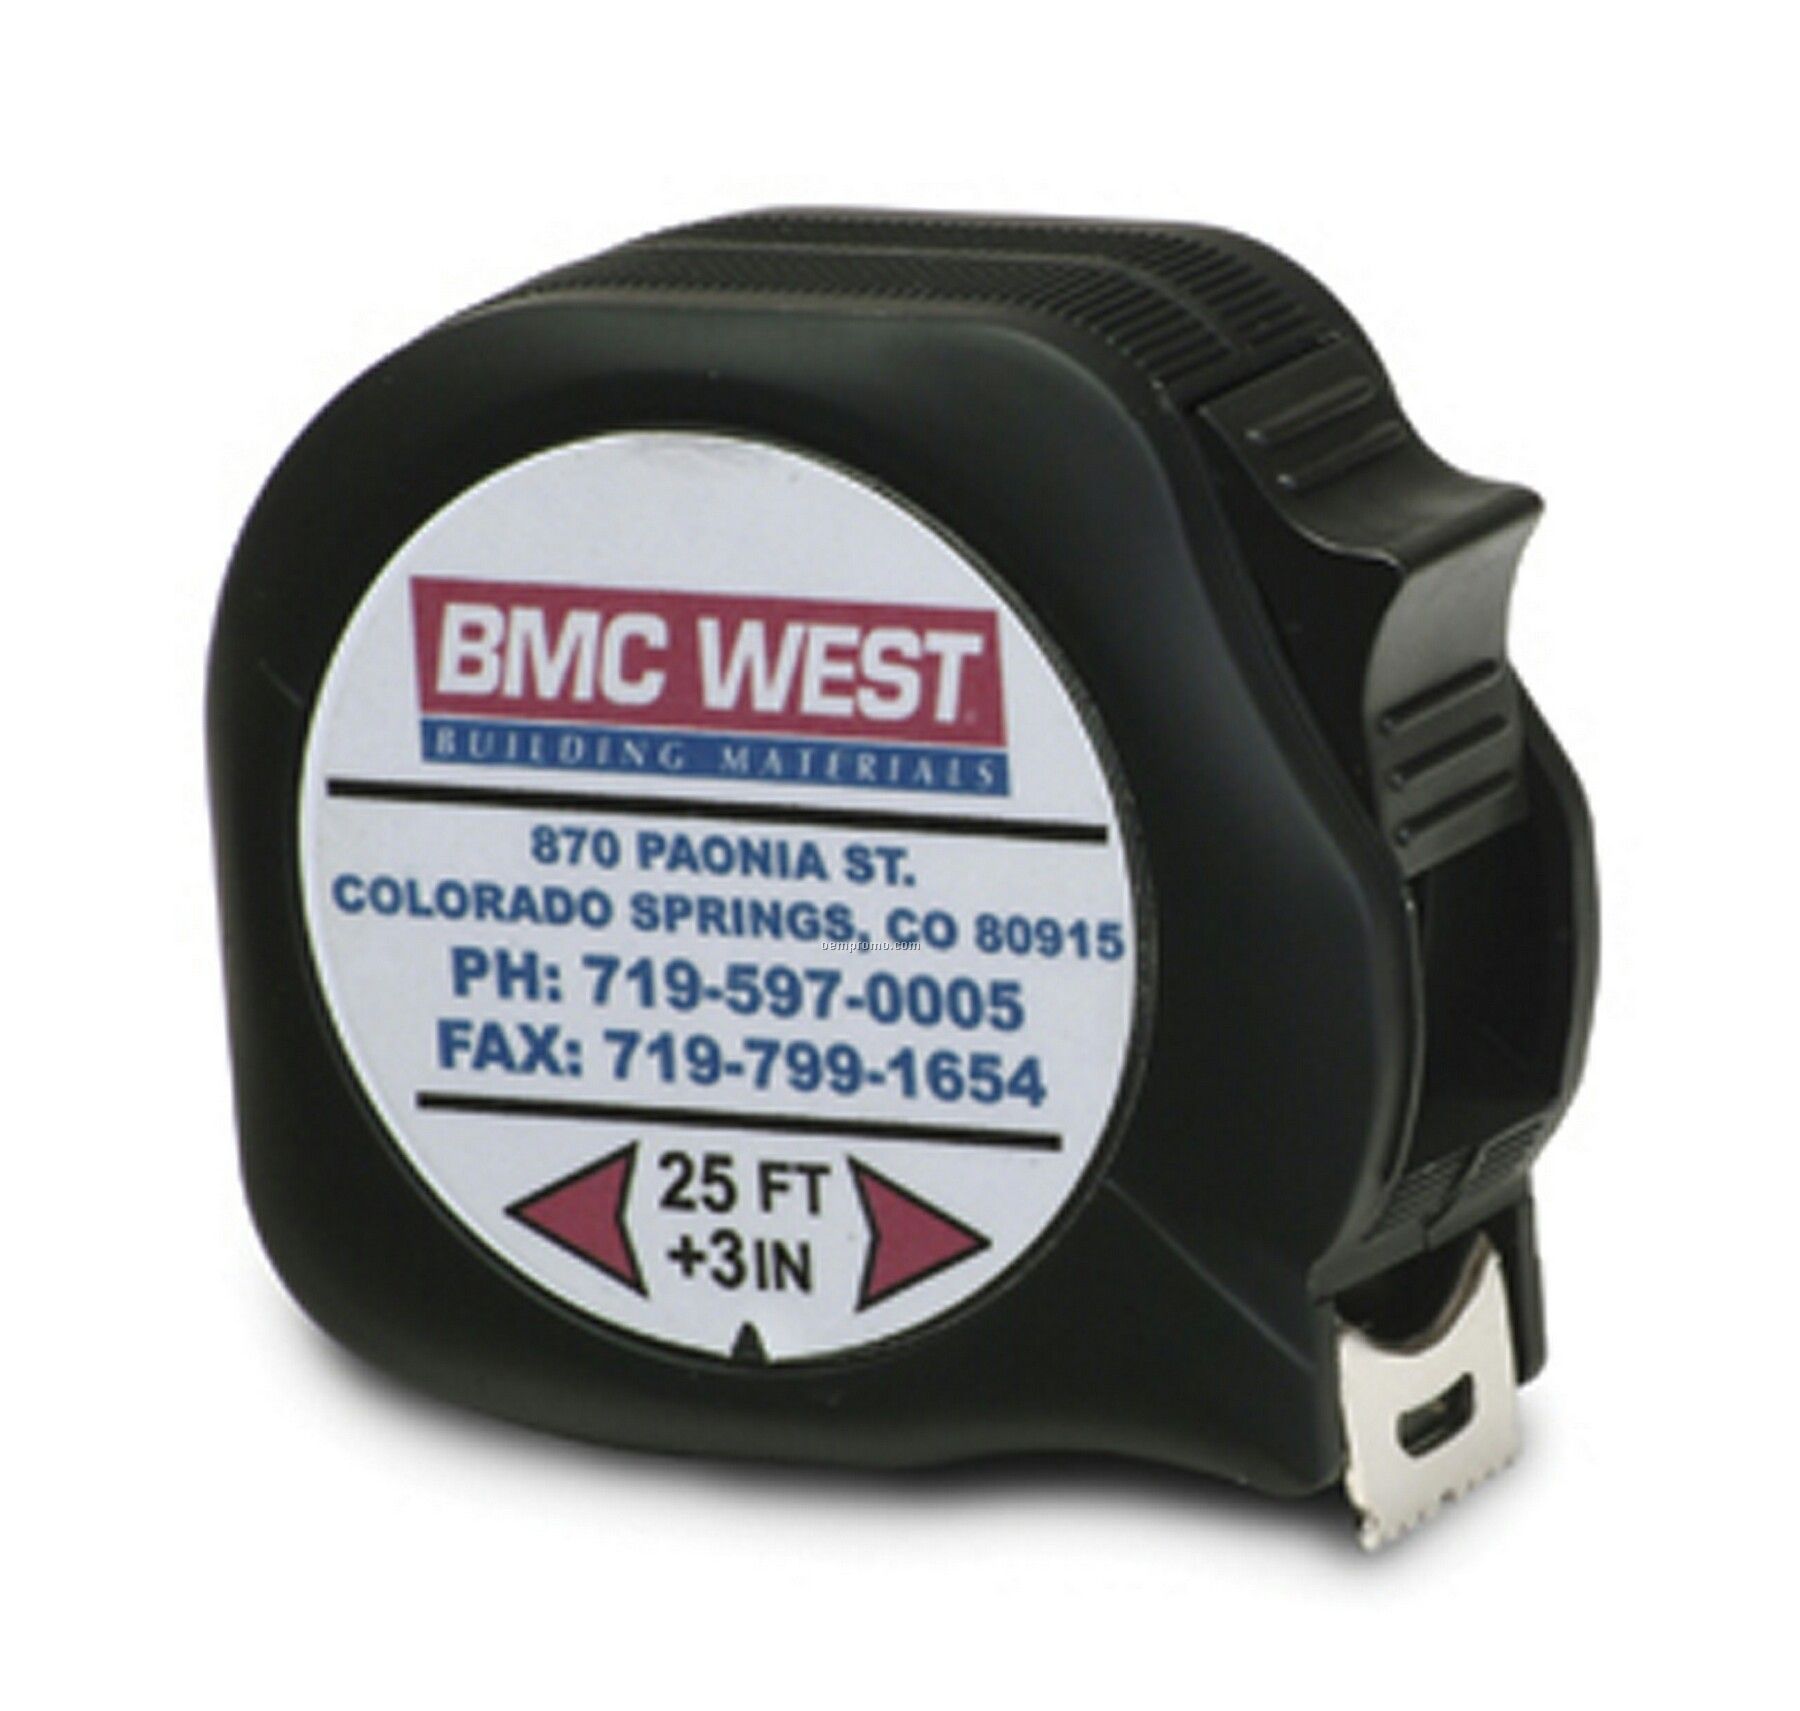 Small Body Tape Measure With Black Case, 25' X 1" Blade